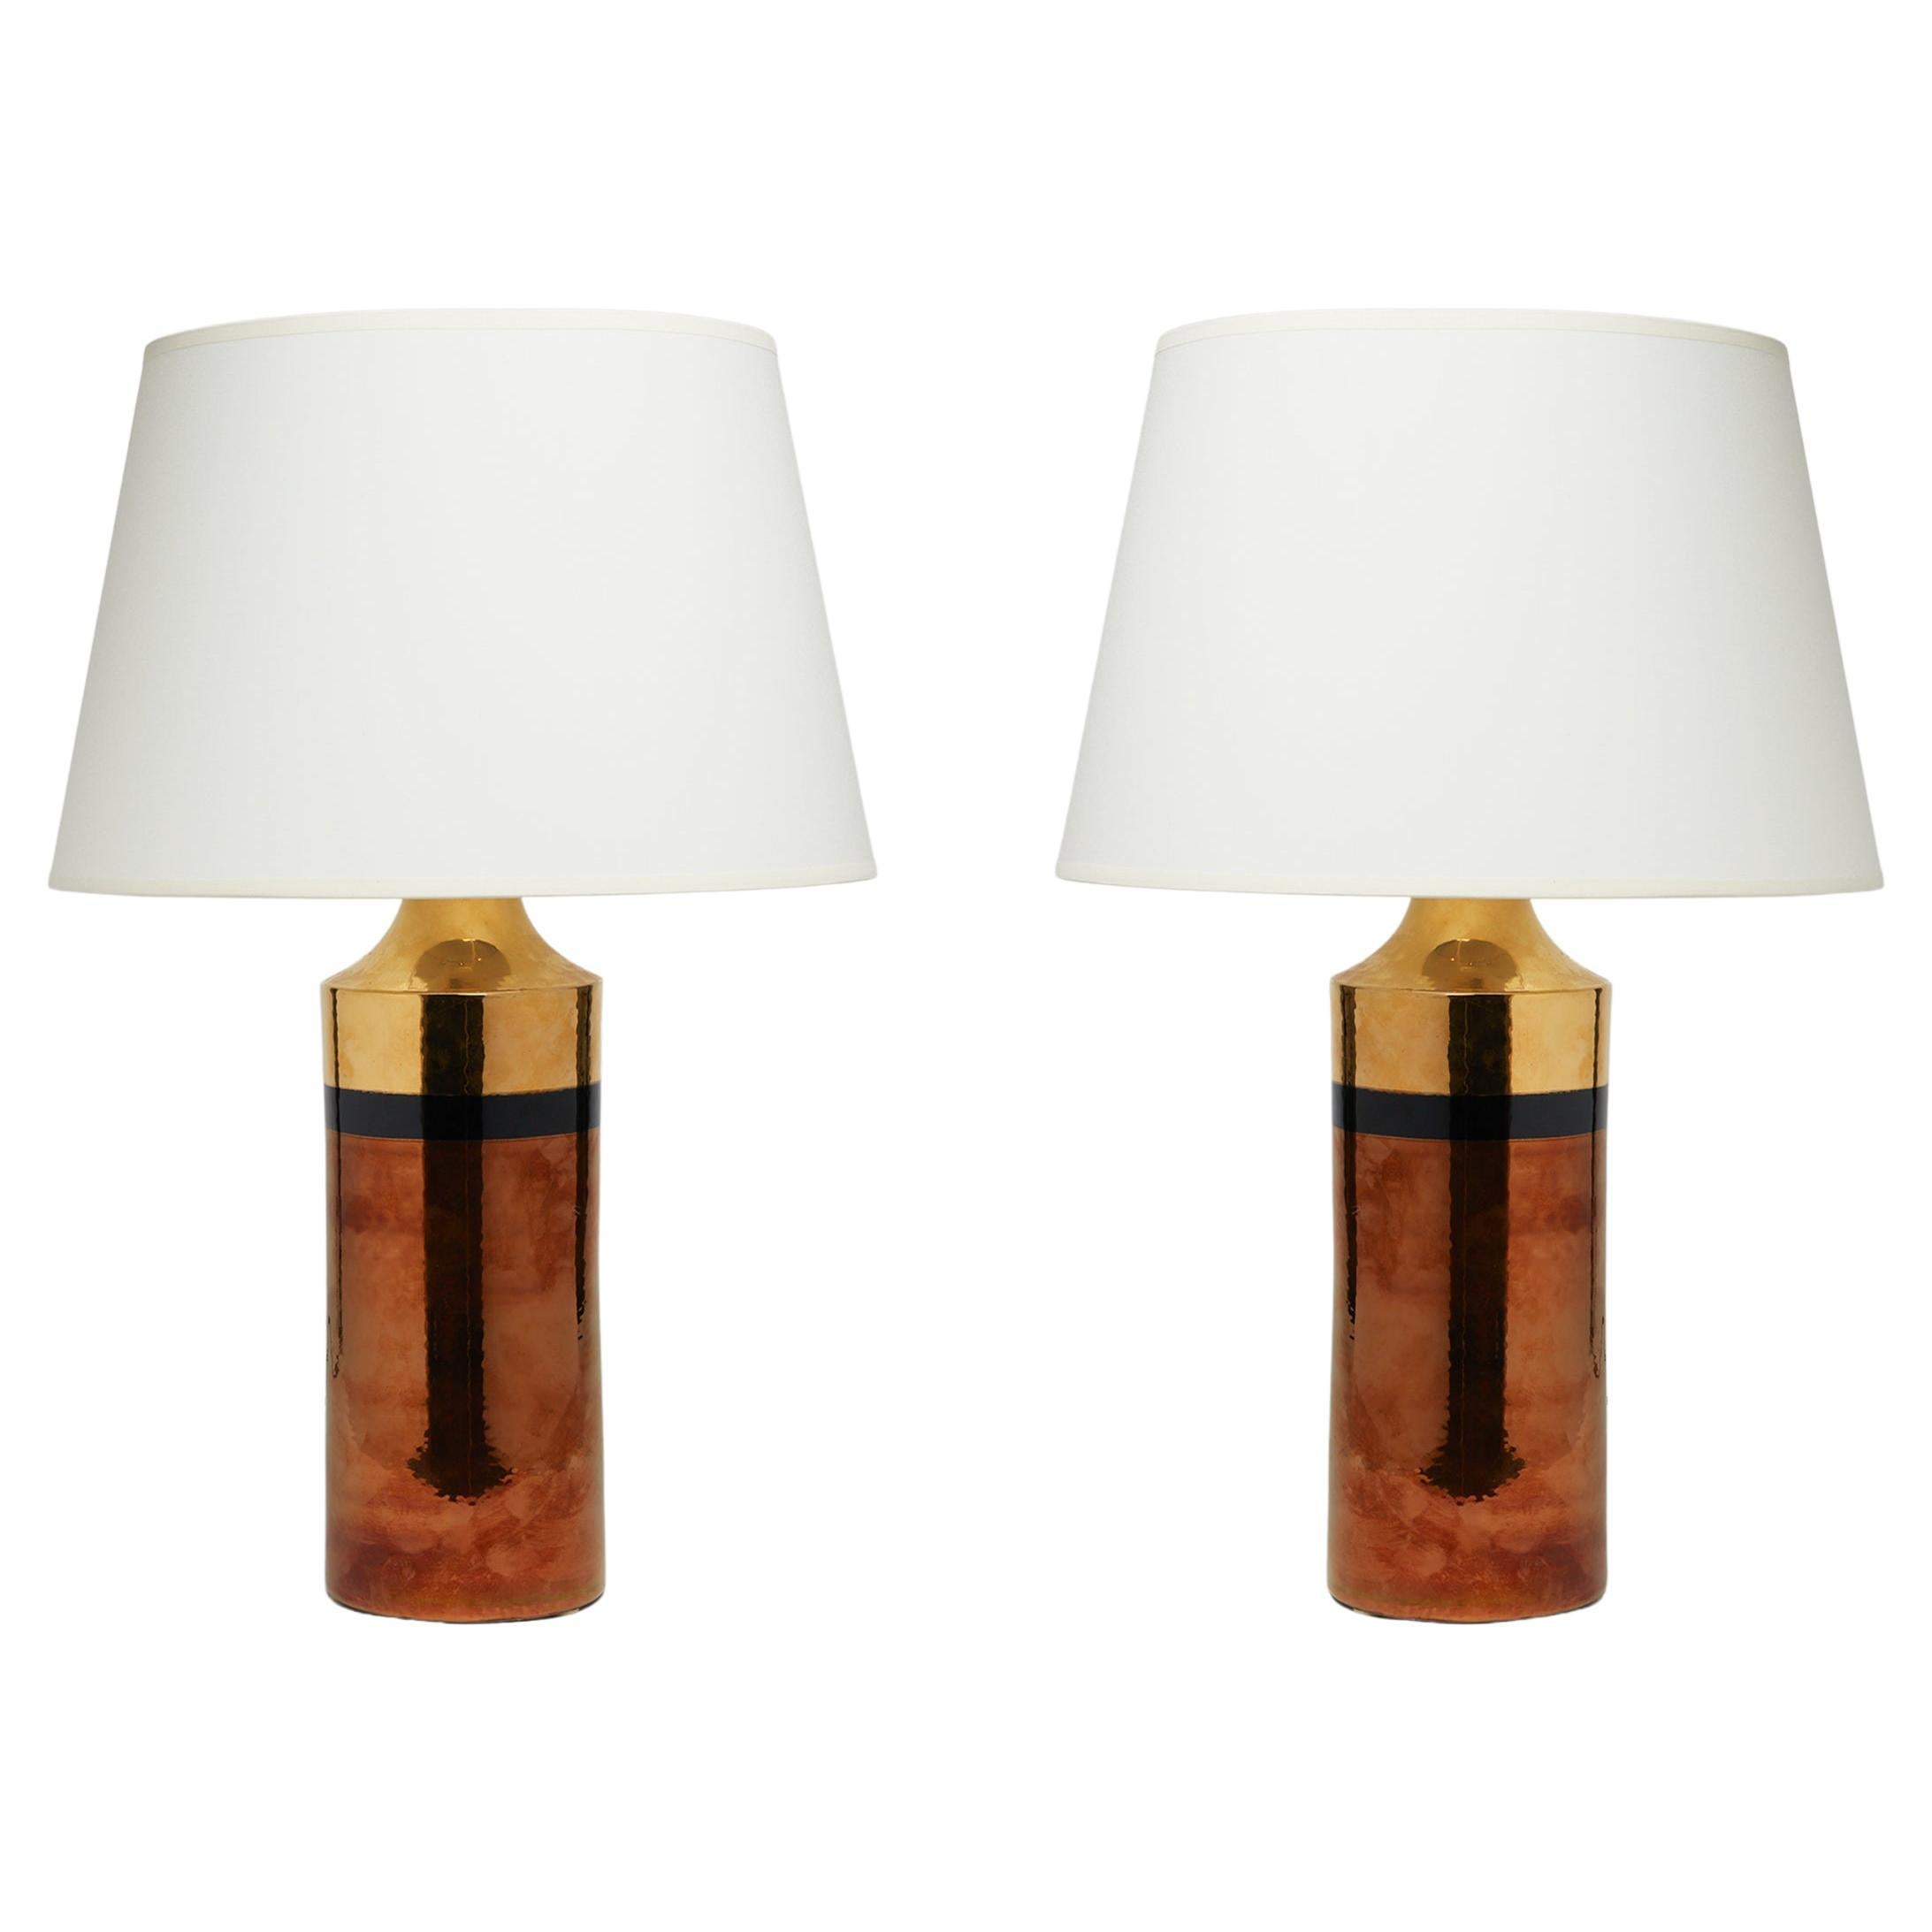 Pair of Mid-Century Ceramic Table Lamps by Bergboms